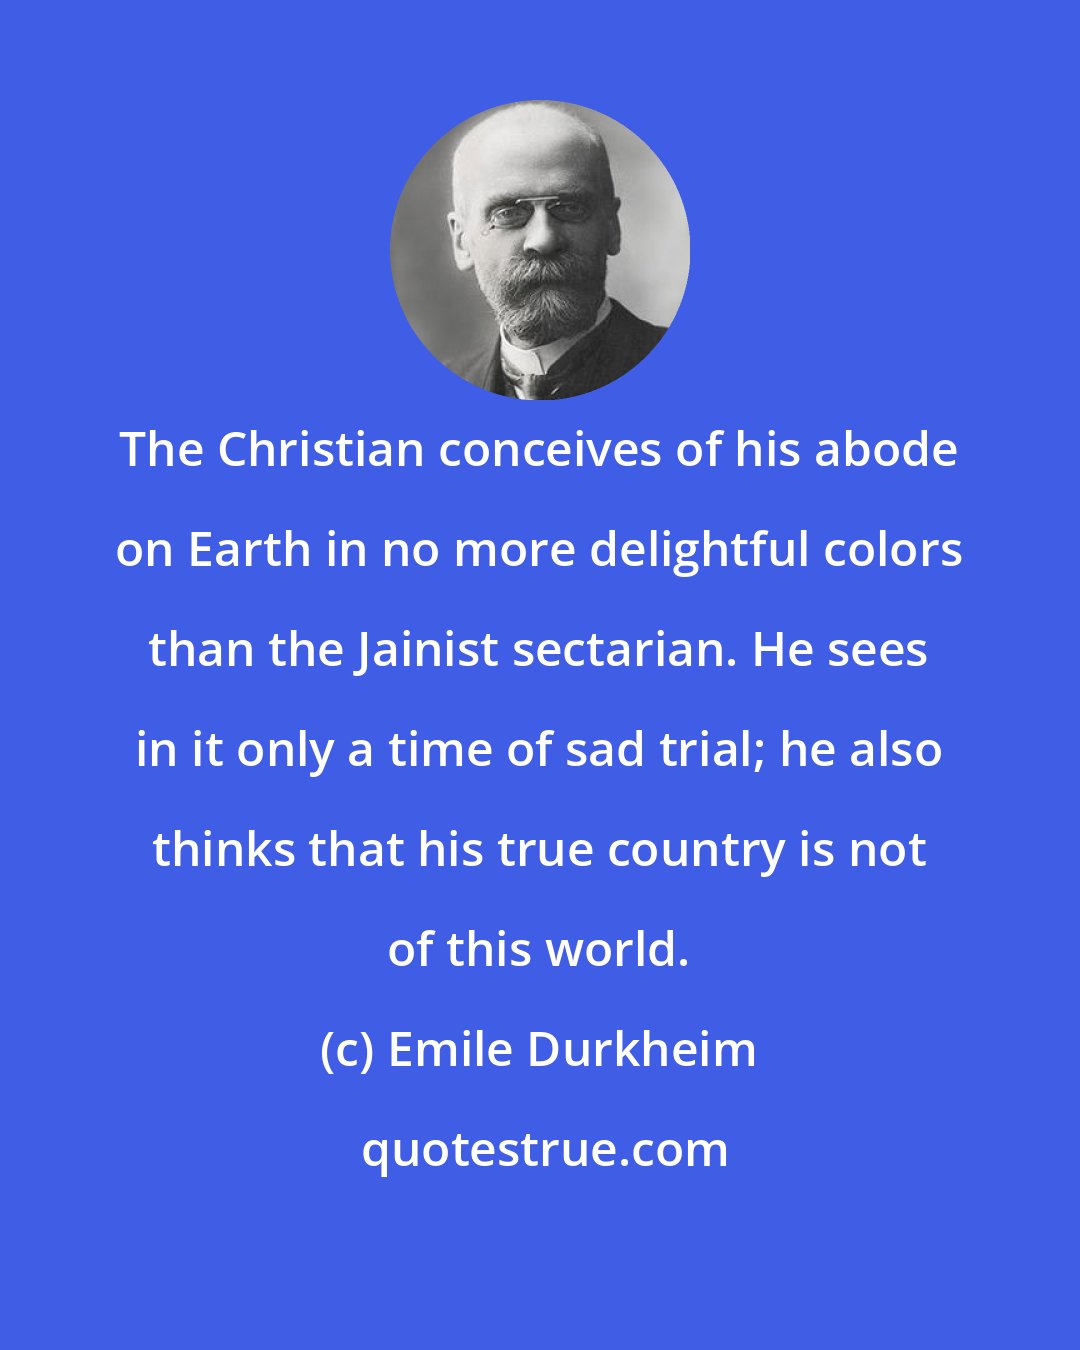 Emile Durkheim: The Christian conceives of his abode on Earth in no more delightful colors than the Jainist sectarian. He sees in it only a time of sad trial; he also thinks that his true country is not of this world.